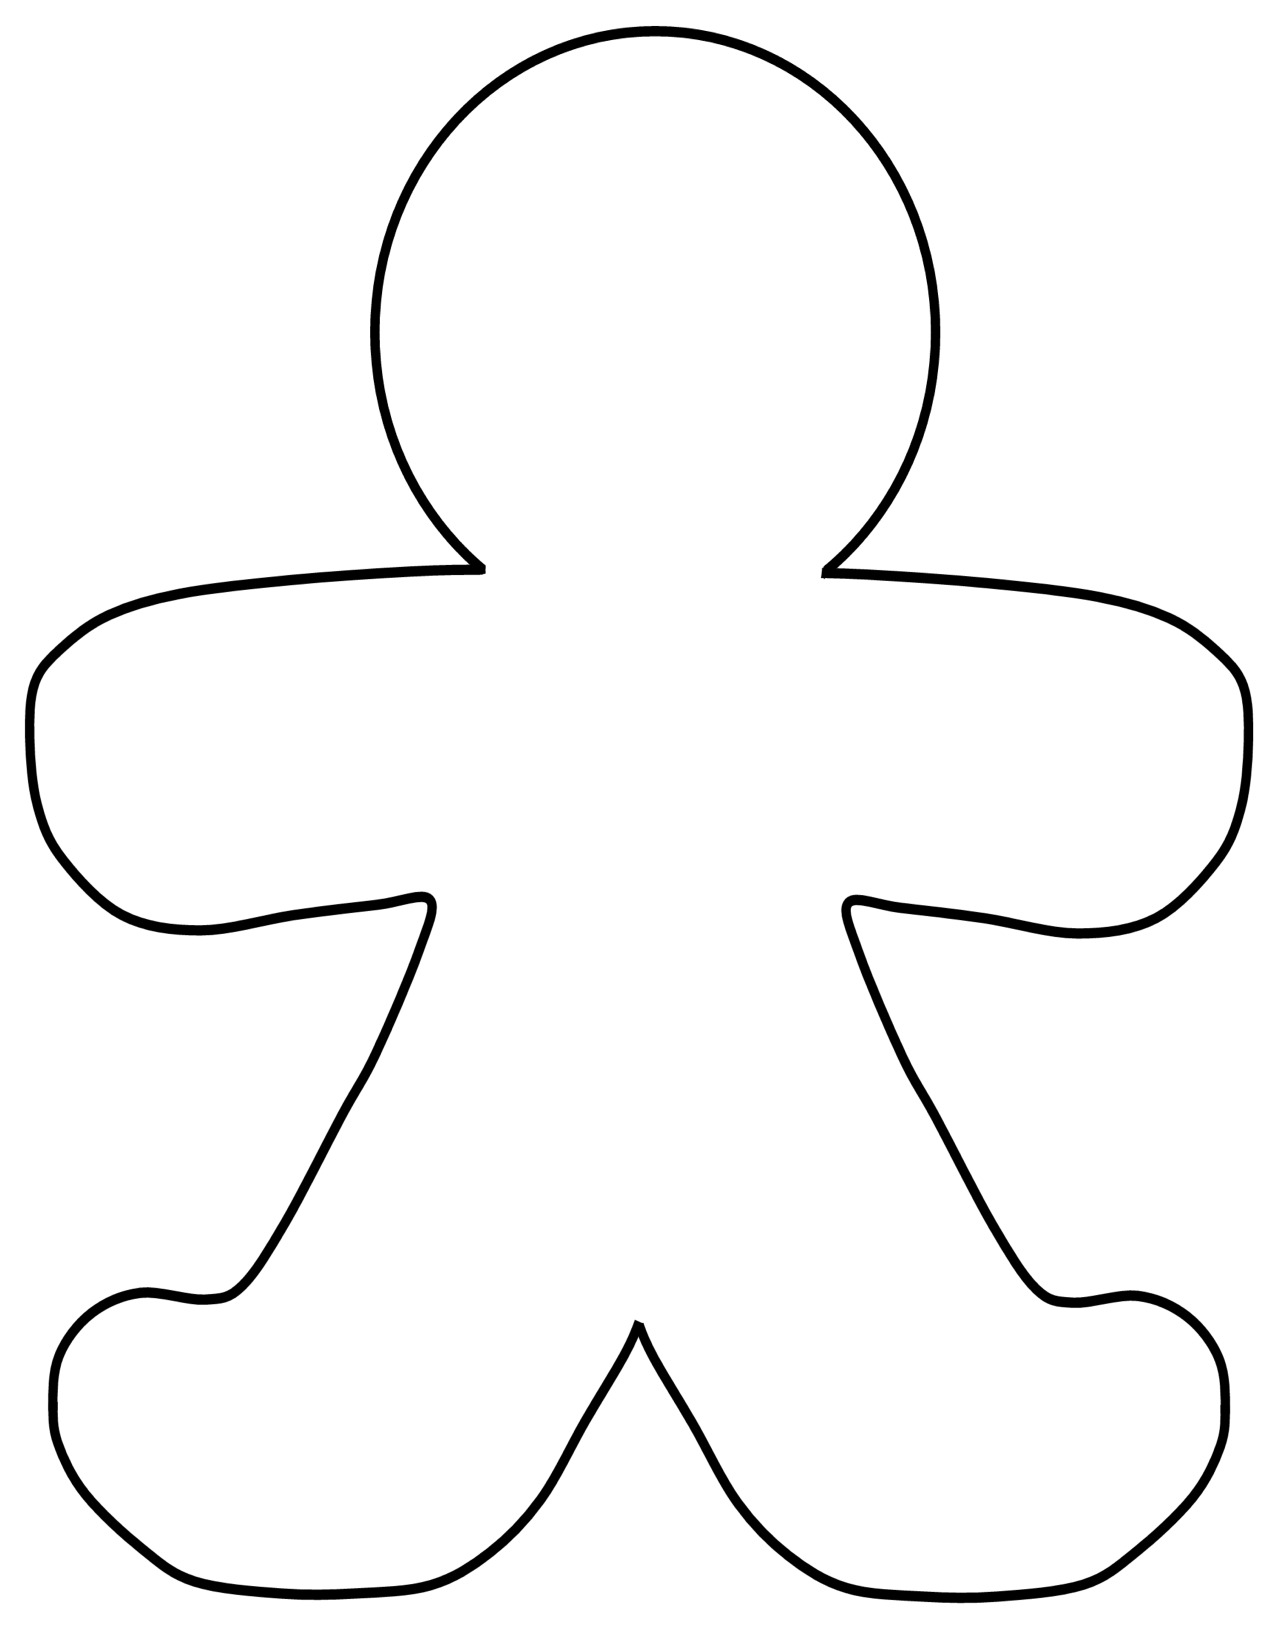 Pix For > Blank Person Outline Printable